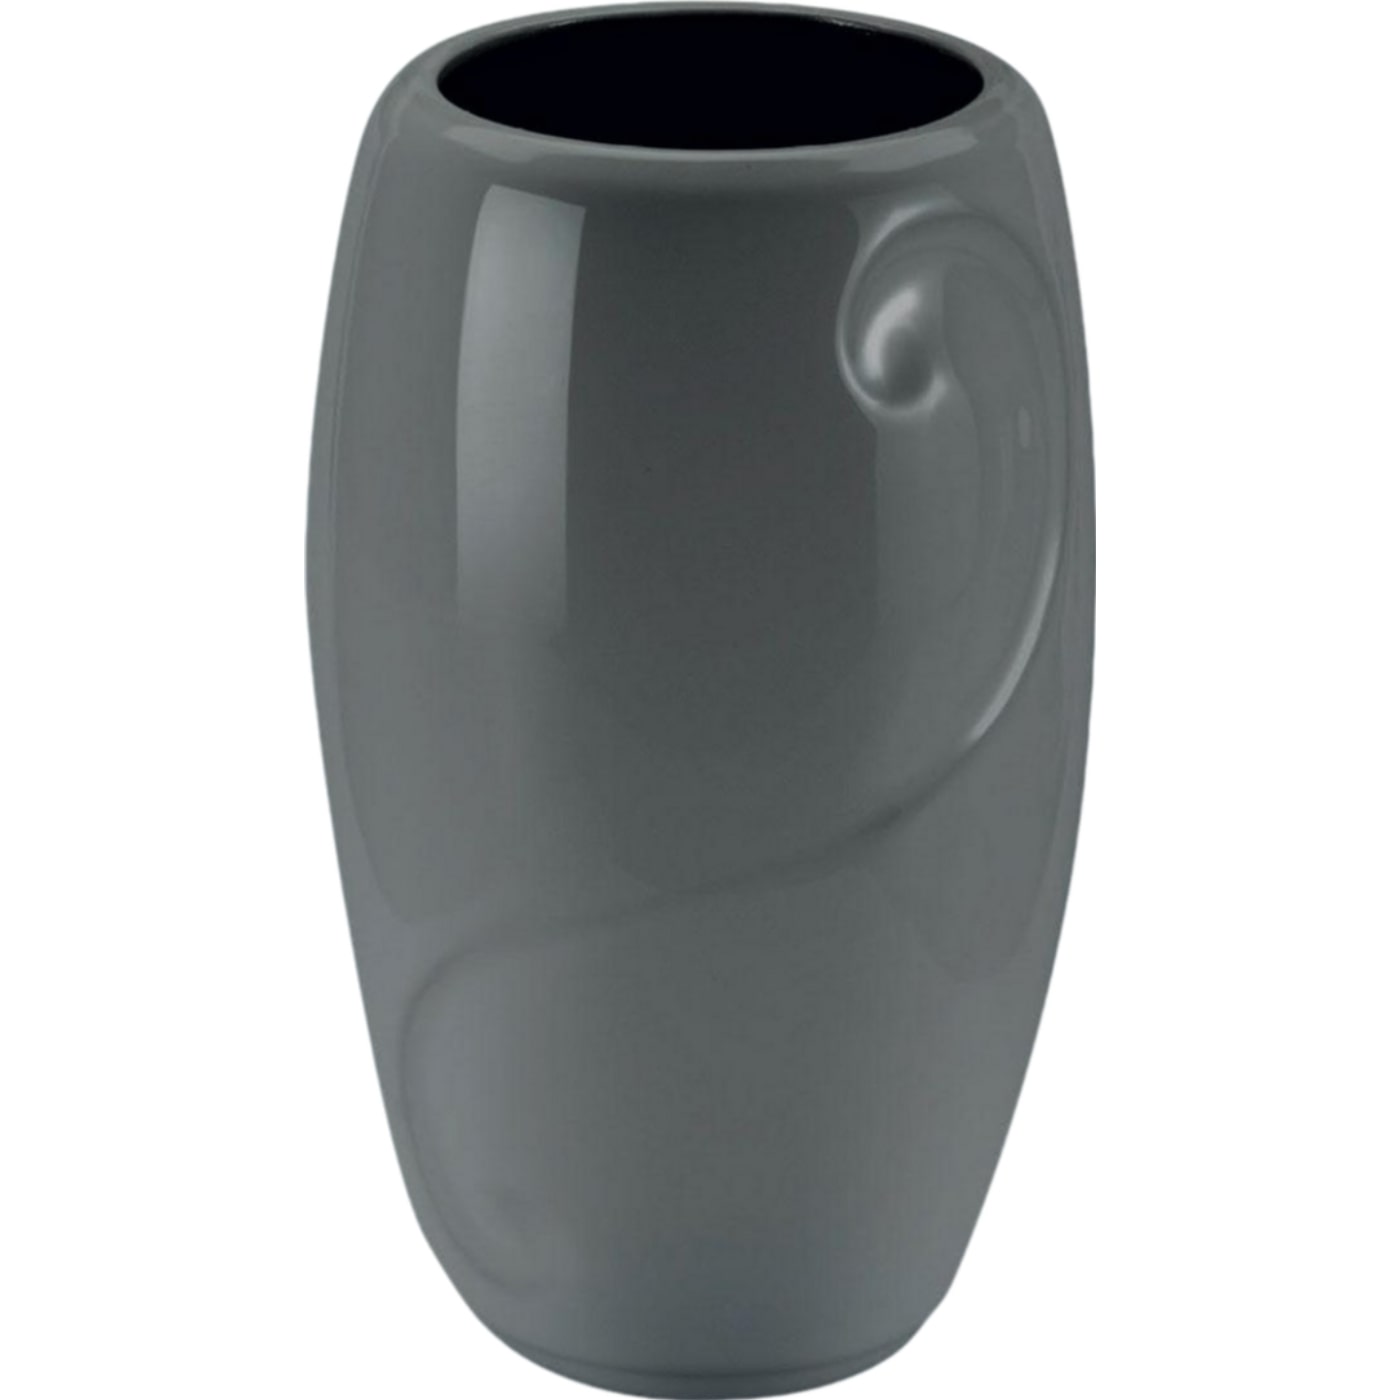 Grave vase Sharon gray 21x13cm - 8.3x5.1in In gray porcelain, wall attached SH124P/G